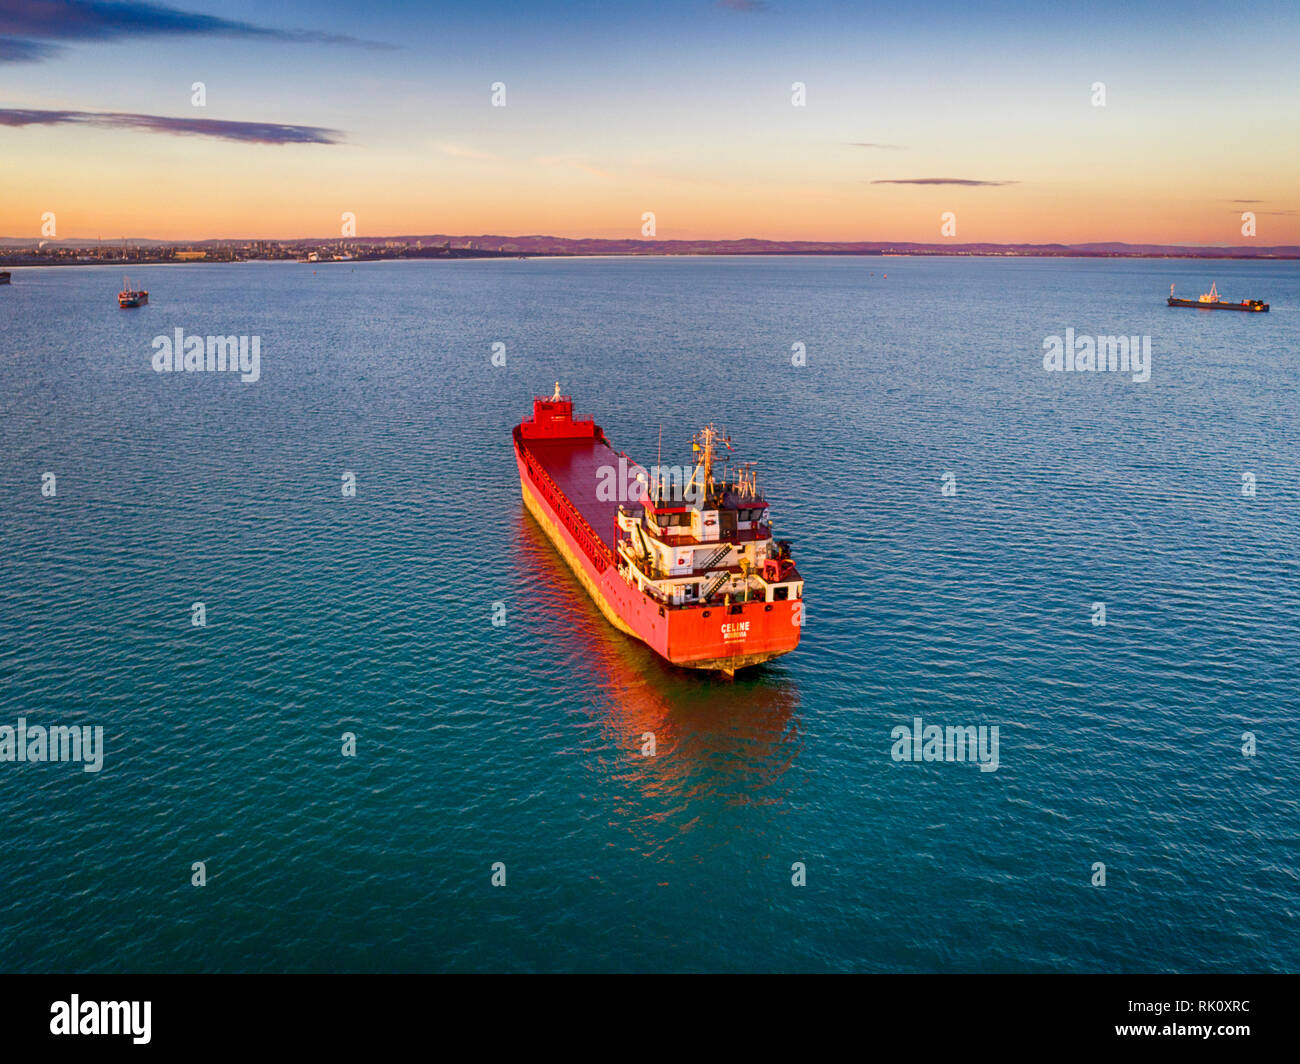 Aerial view of beautiful large ship at sunset. Colorful landscape with boat, sea, colorful sky. Stock Photo